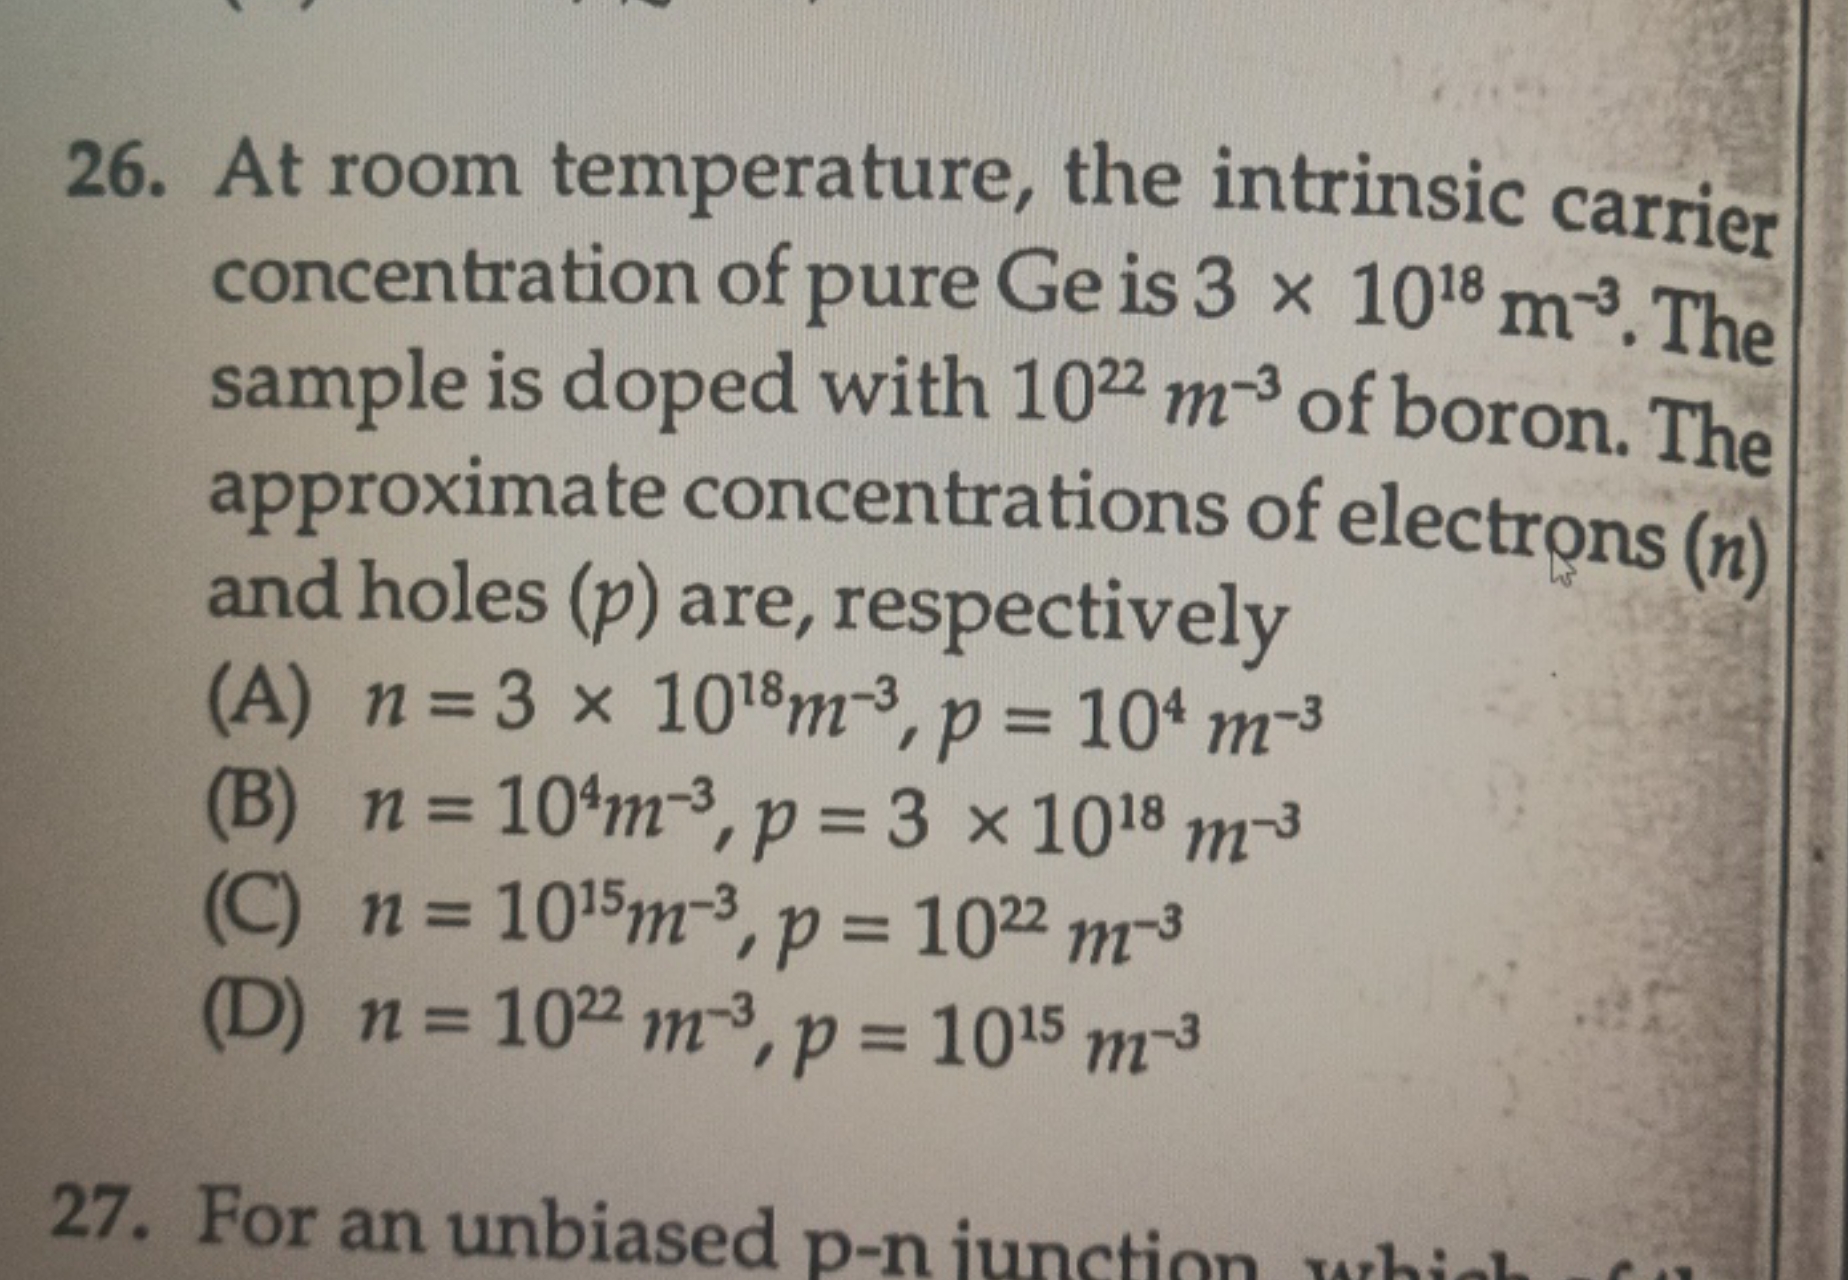 At room temperature, the intrinsic carrier concentration of pure Ge is